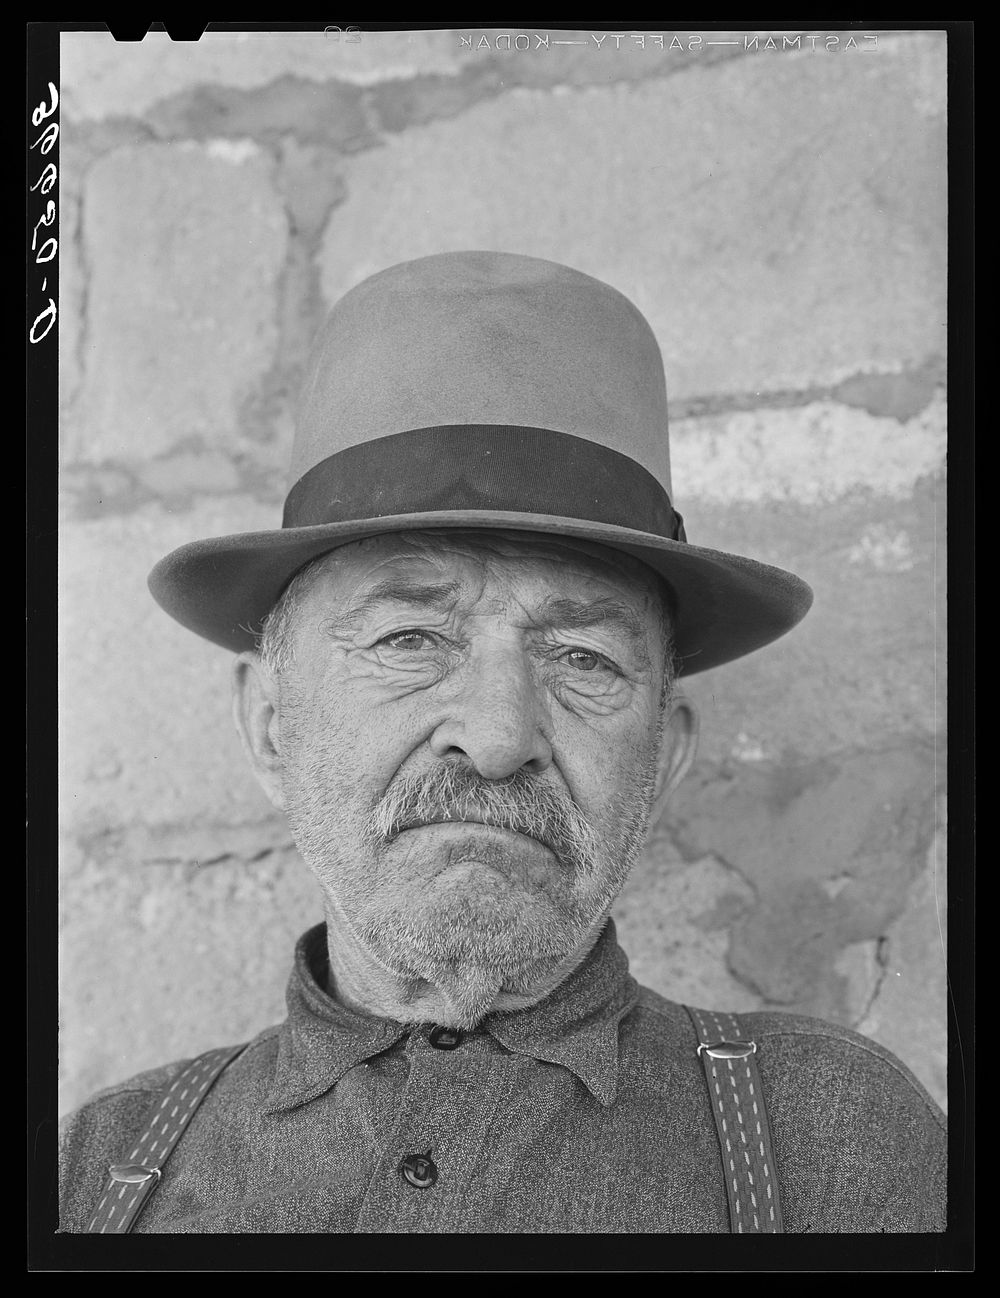 Uncle Bill, old character living at Reserve, New Mexico. He was once a cowboy rancher. He now runs a saloon by Russell Lee